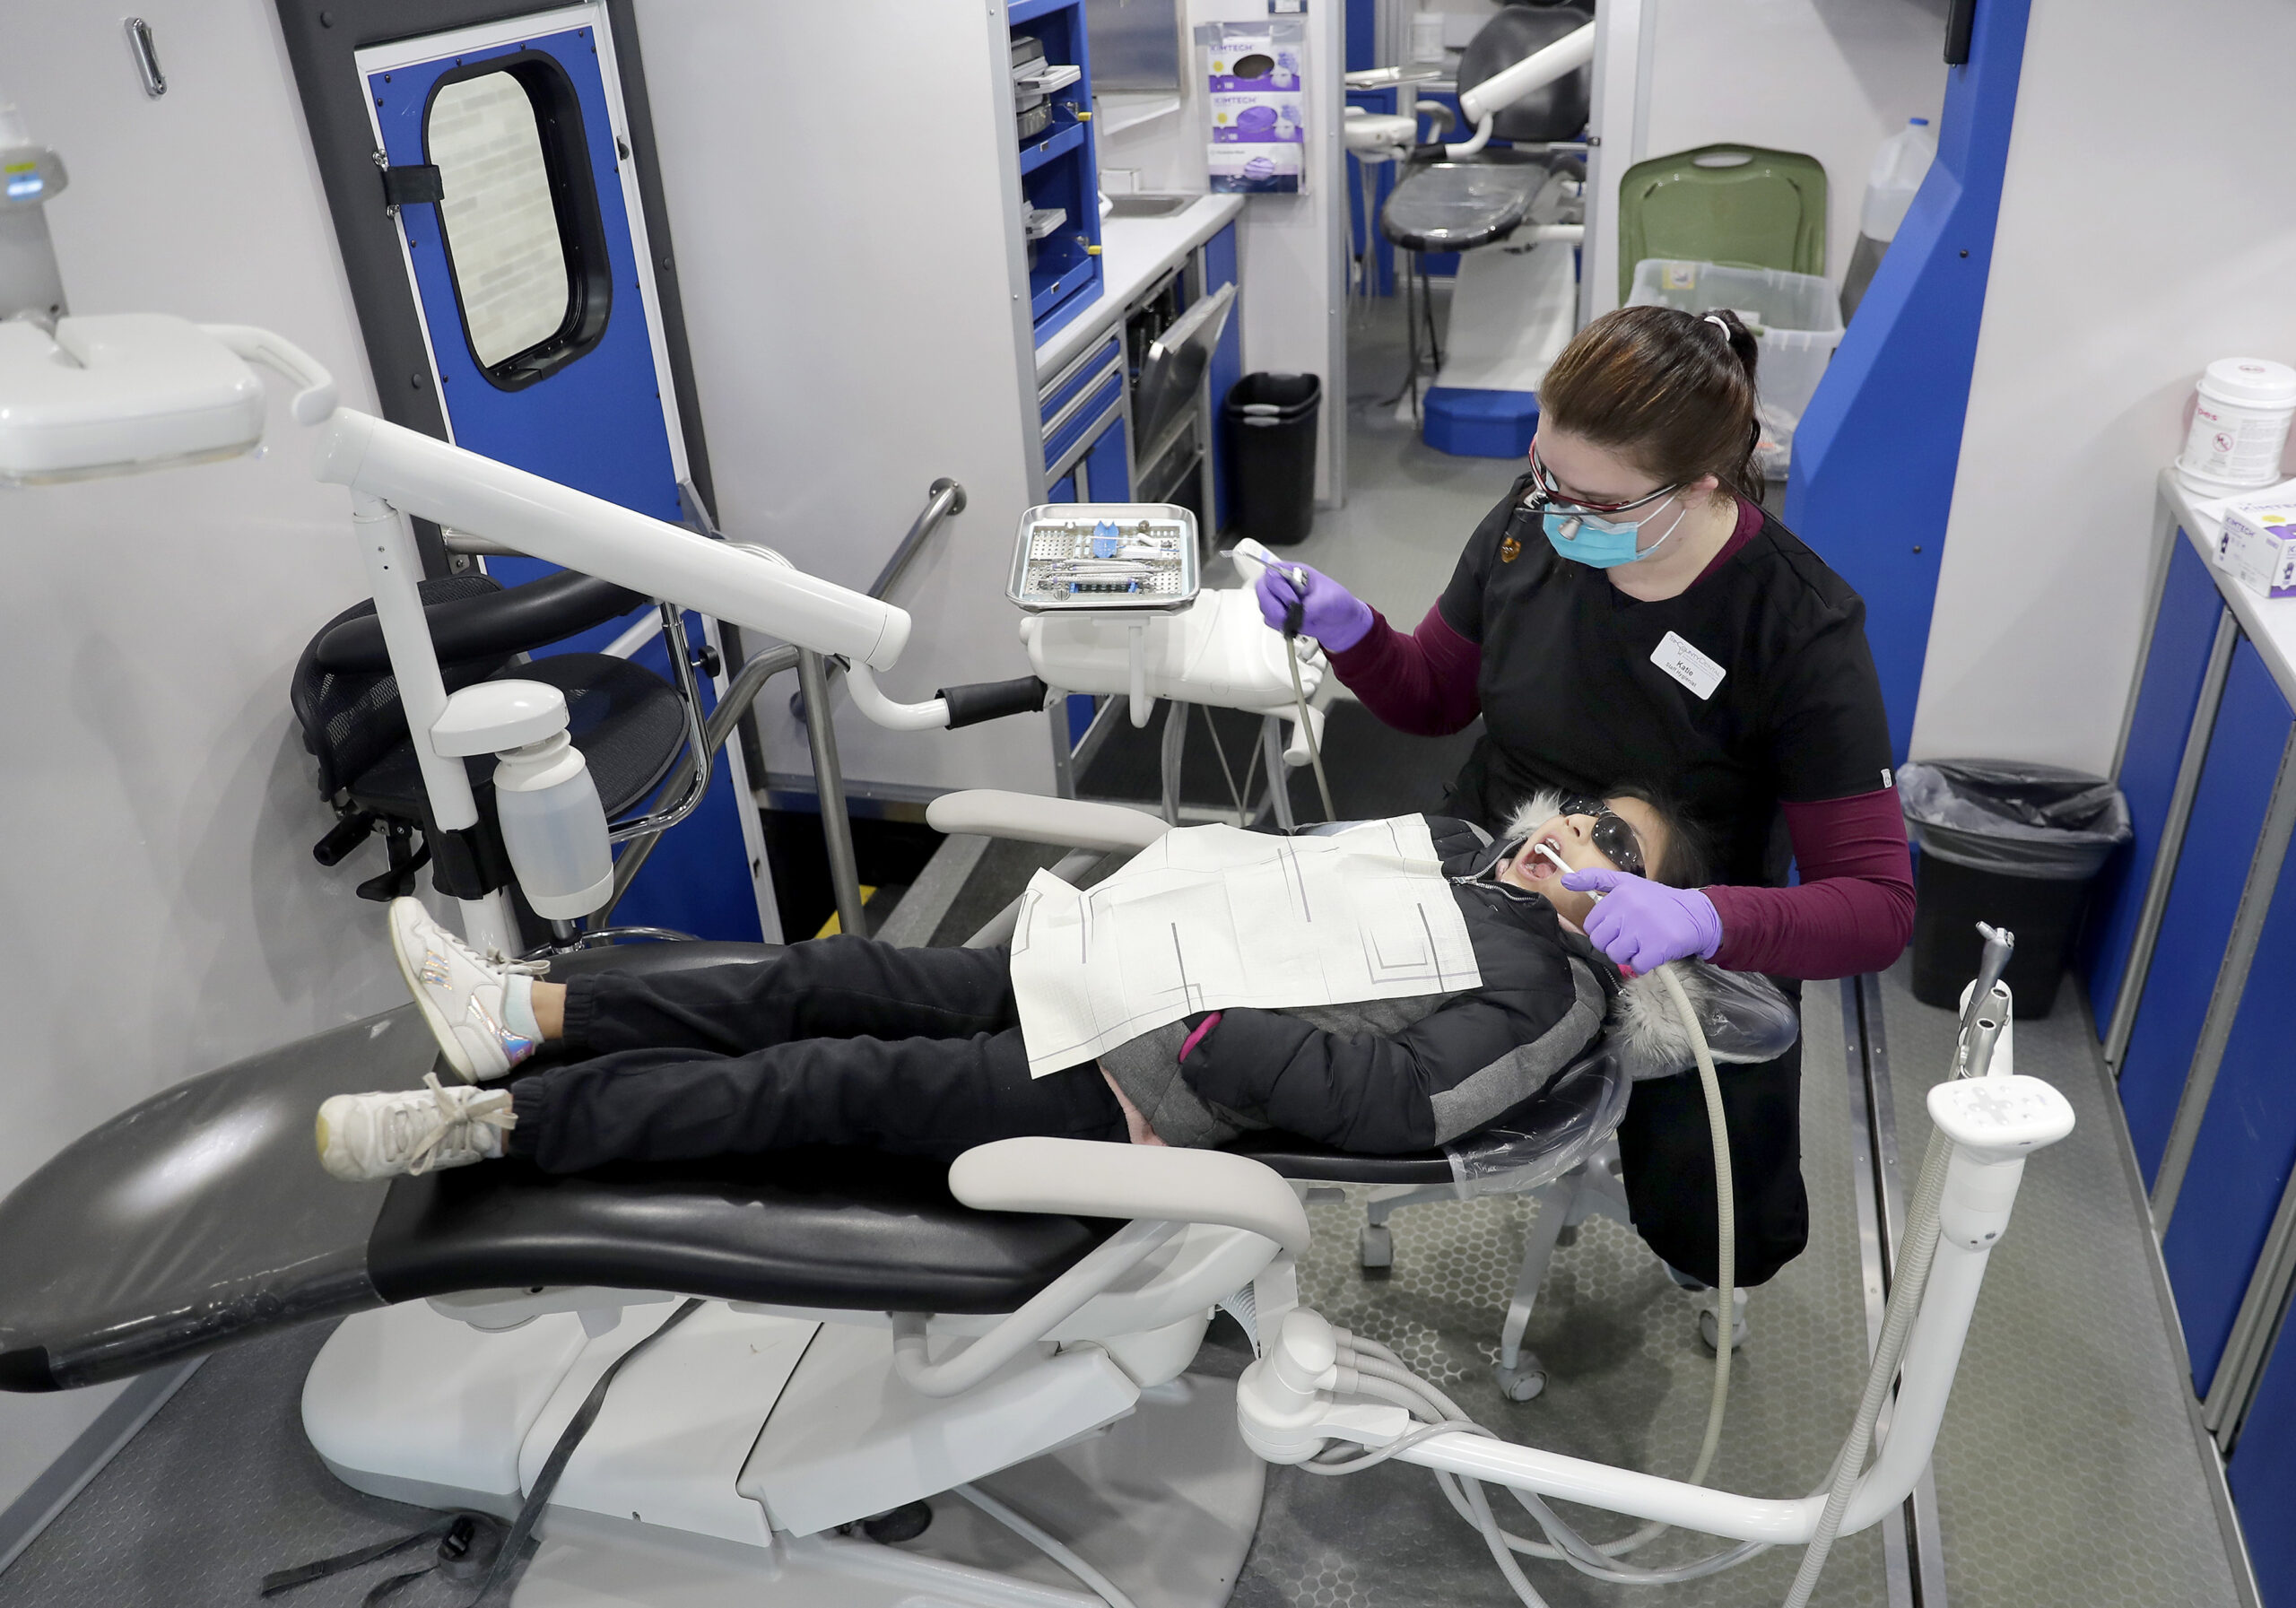 Many kids missed dental care during the pandemic. Luckily, these dentists visit schools for free